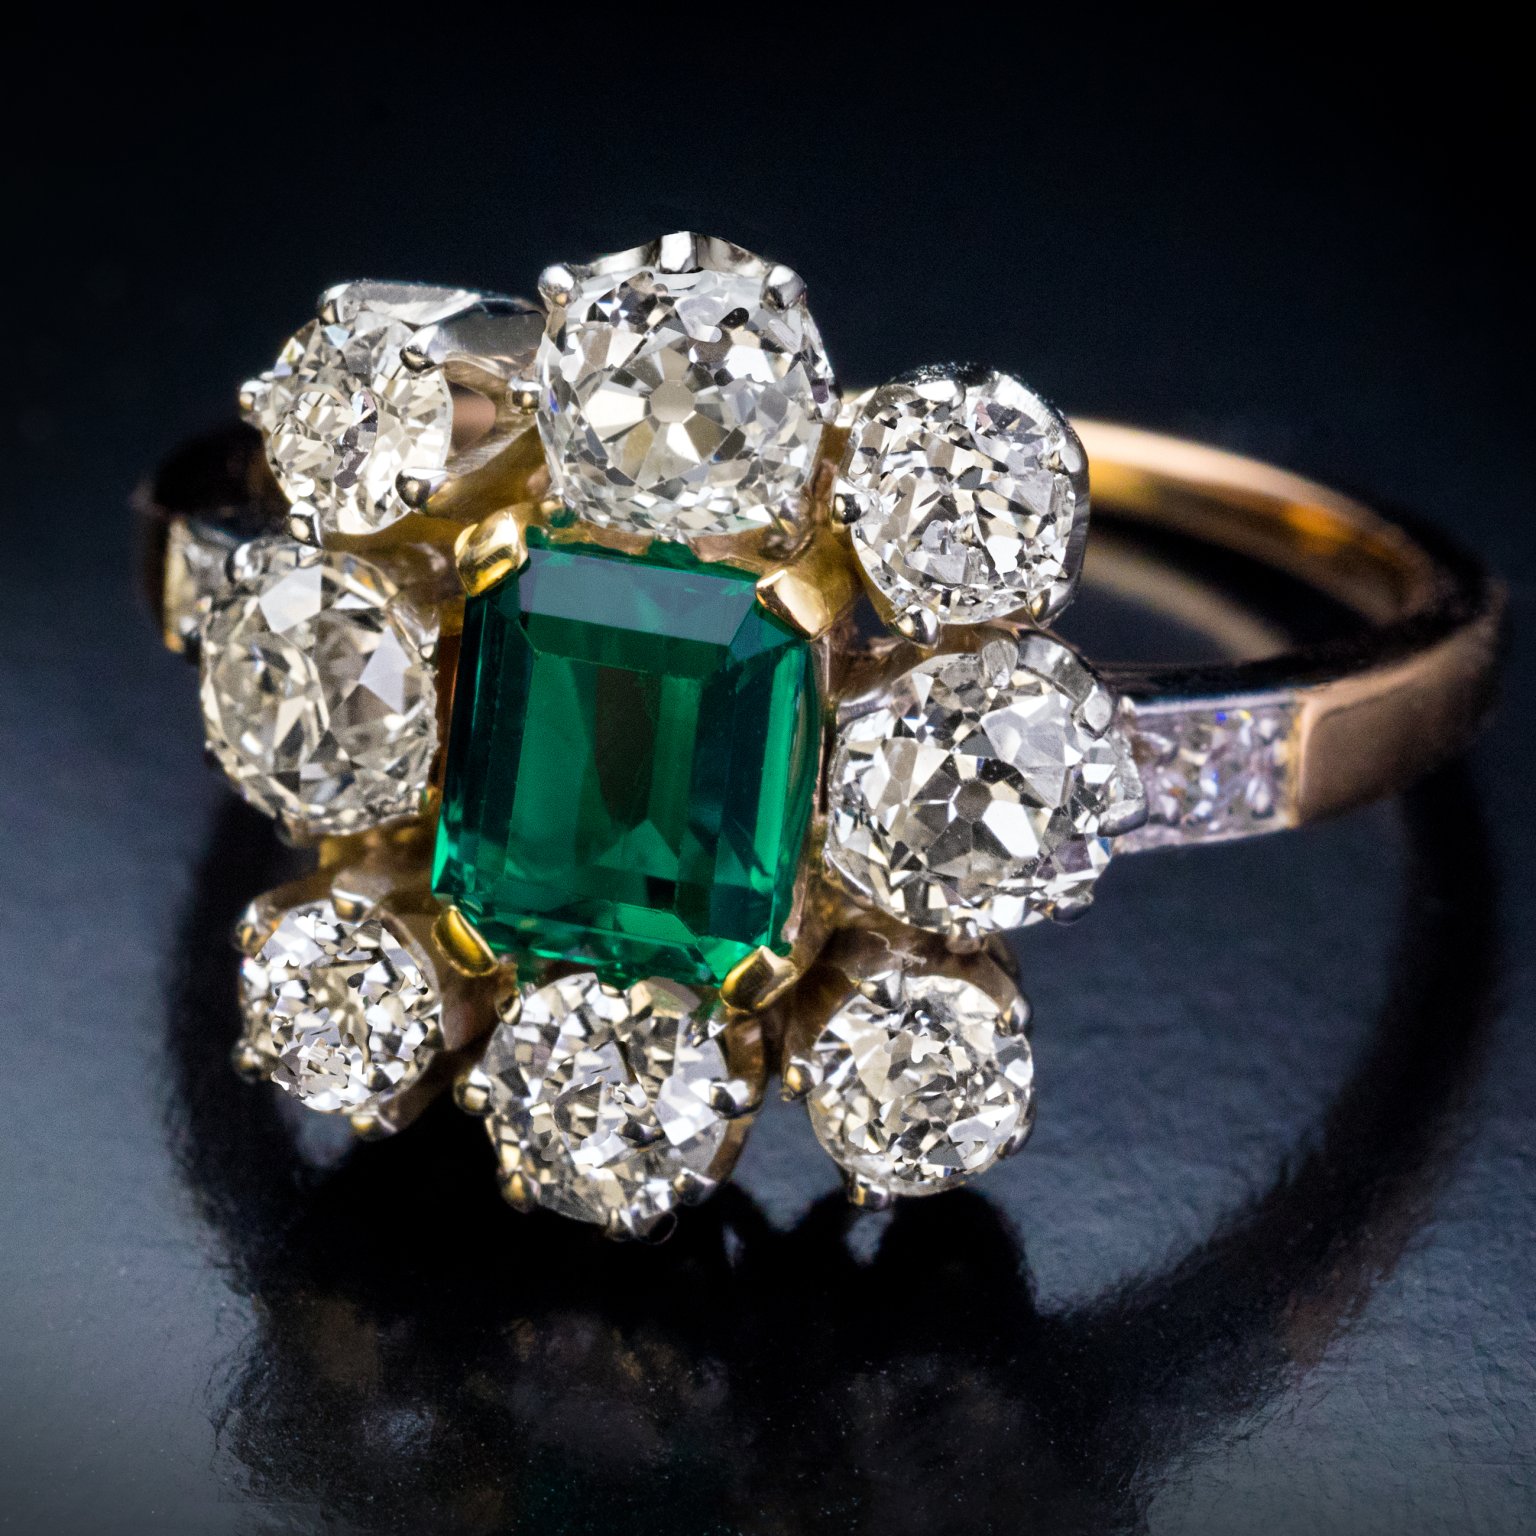 Vintage & Antique Engagement Rings - Antique Jewelry | Vintage Rings ...